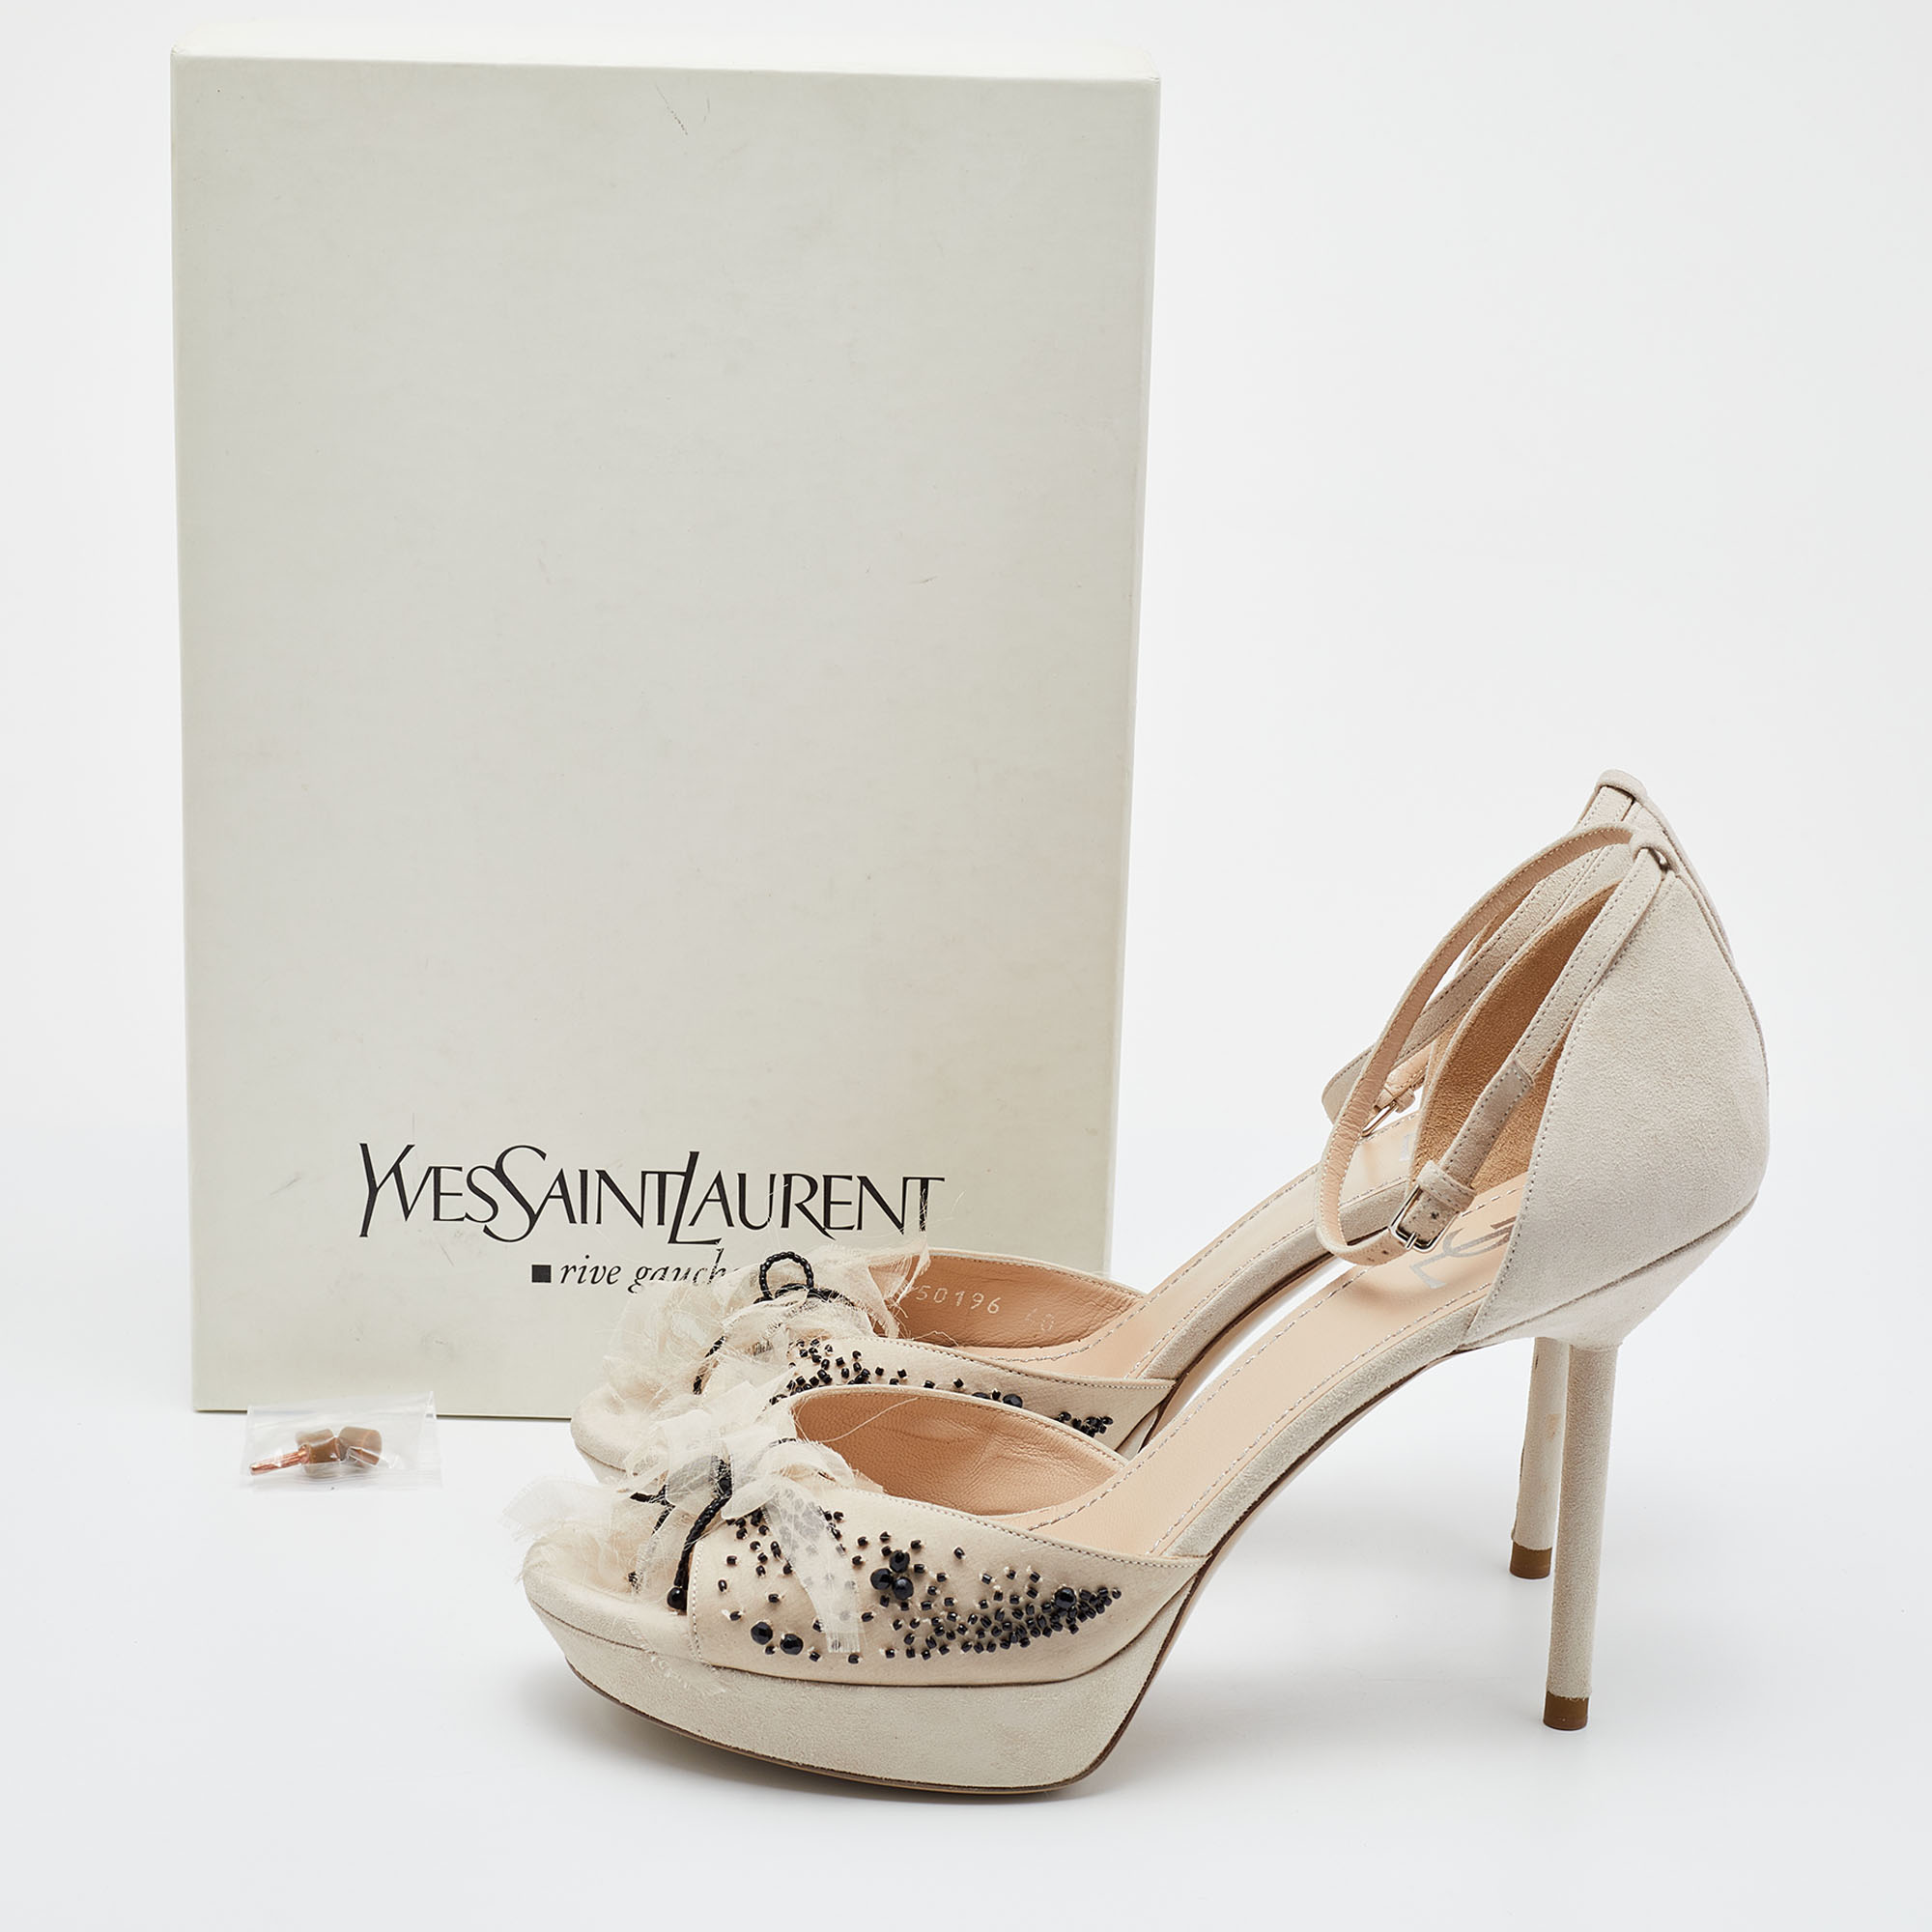 Yves Saint Laurent Off White Suede And Fabric Ankle Strap Platform Sandals Size 40